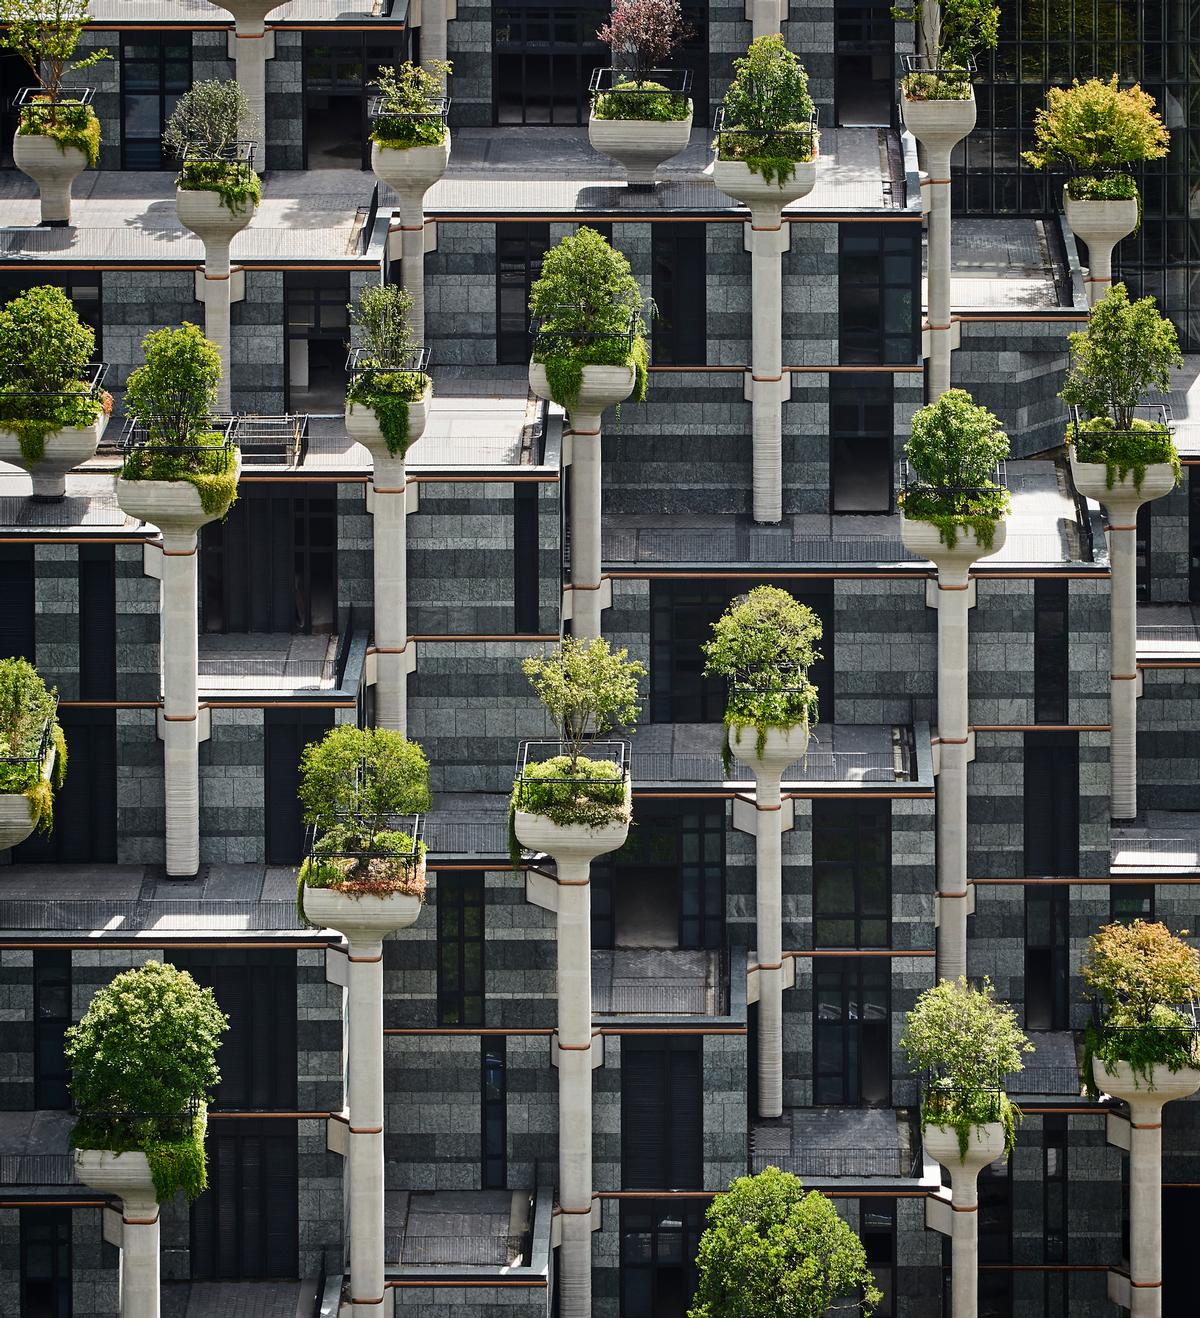 The building's hundreds of structural support columns double as podiums with large planters built into the top / Qingyan Zhu